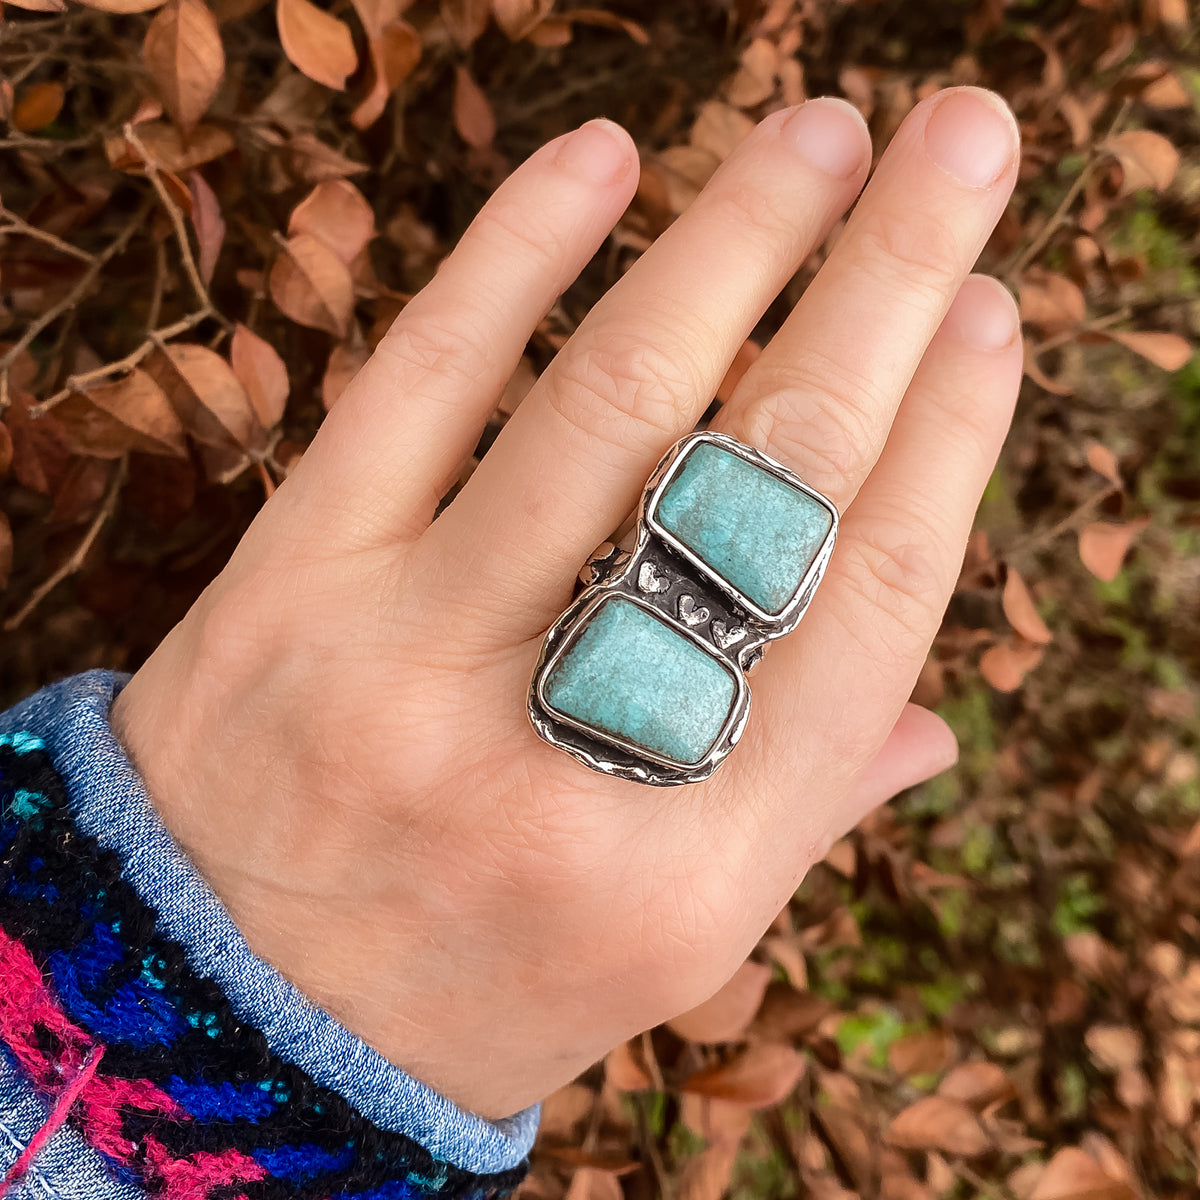 Into the Blue Turquoise Ring - Size 9